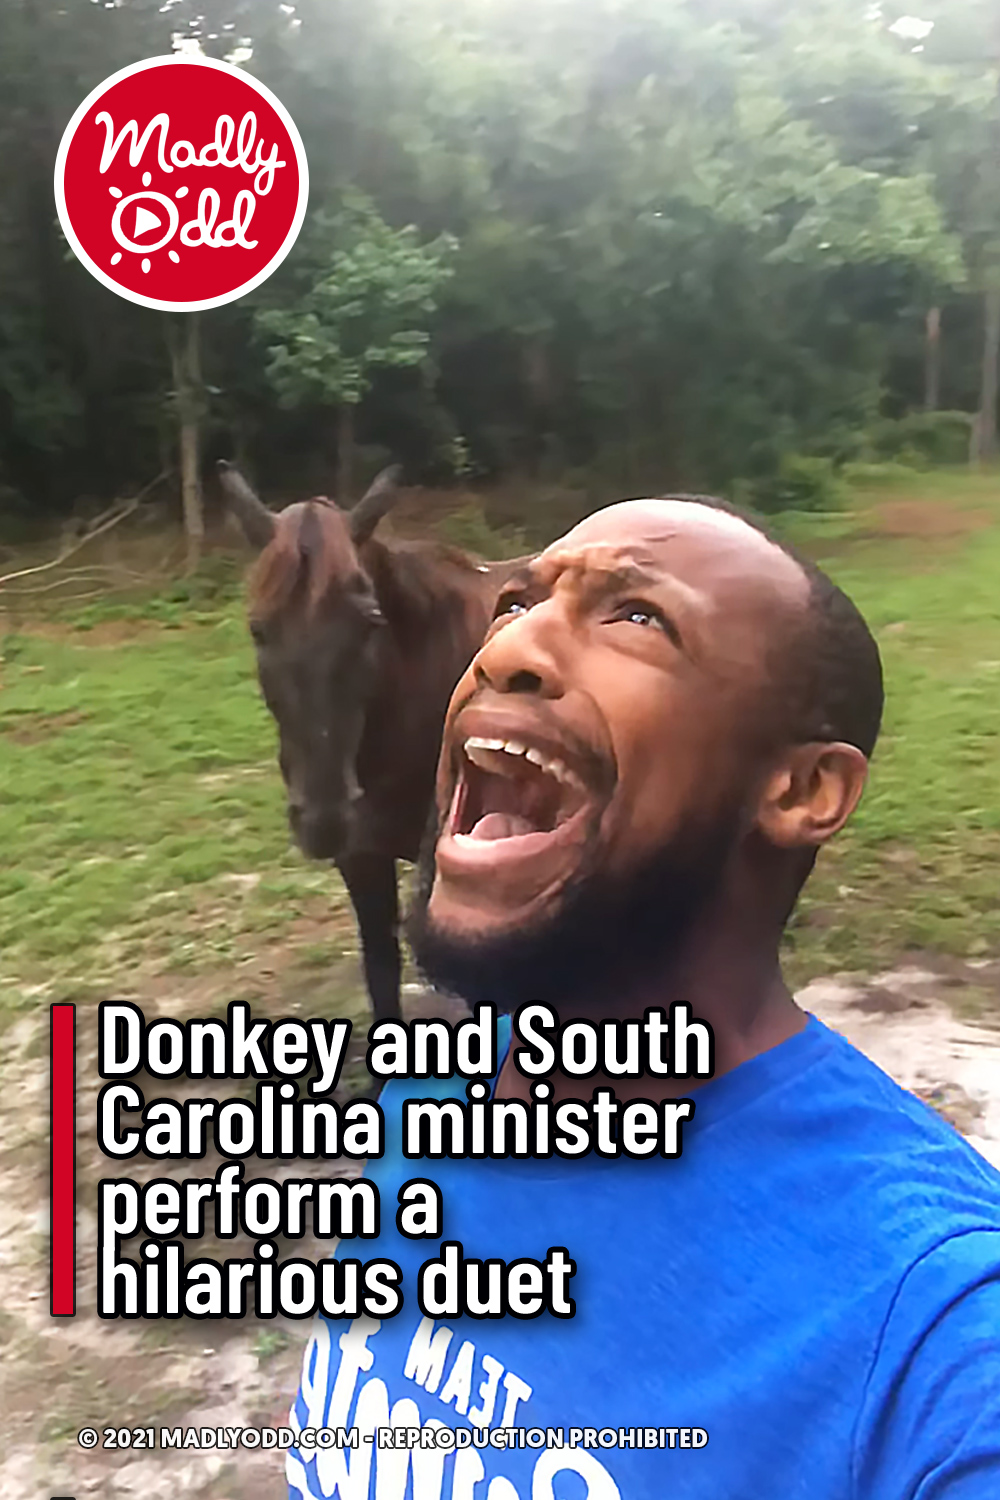 Donkey and South Carolina minister perform a hilarious duet